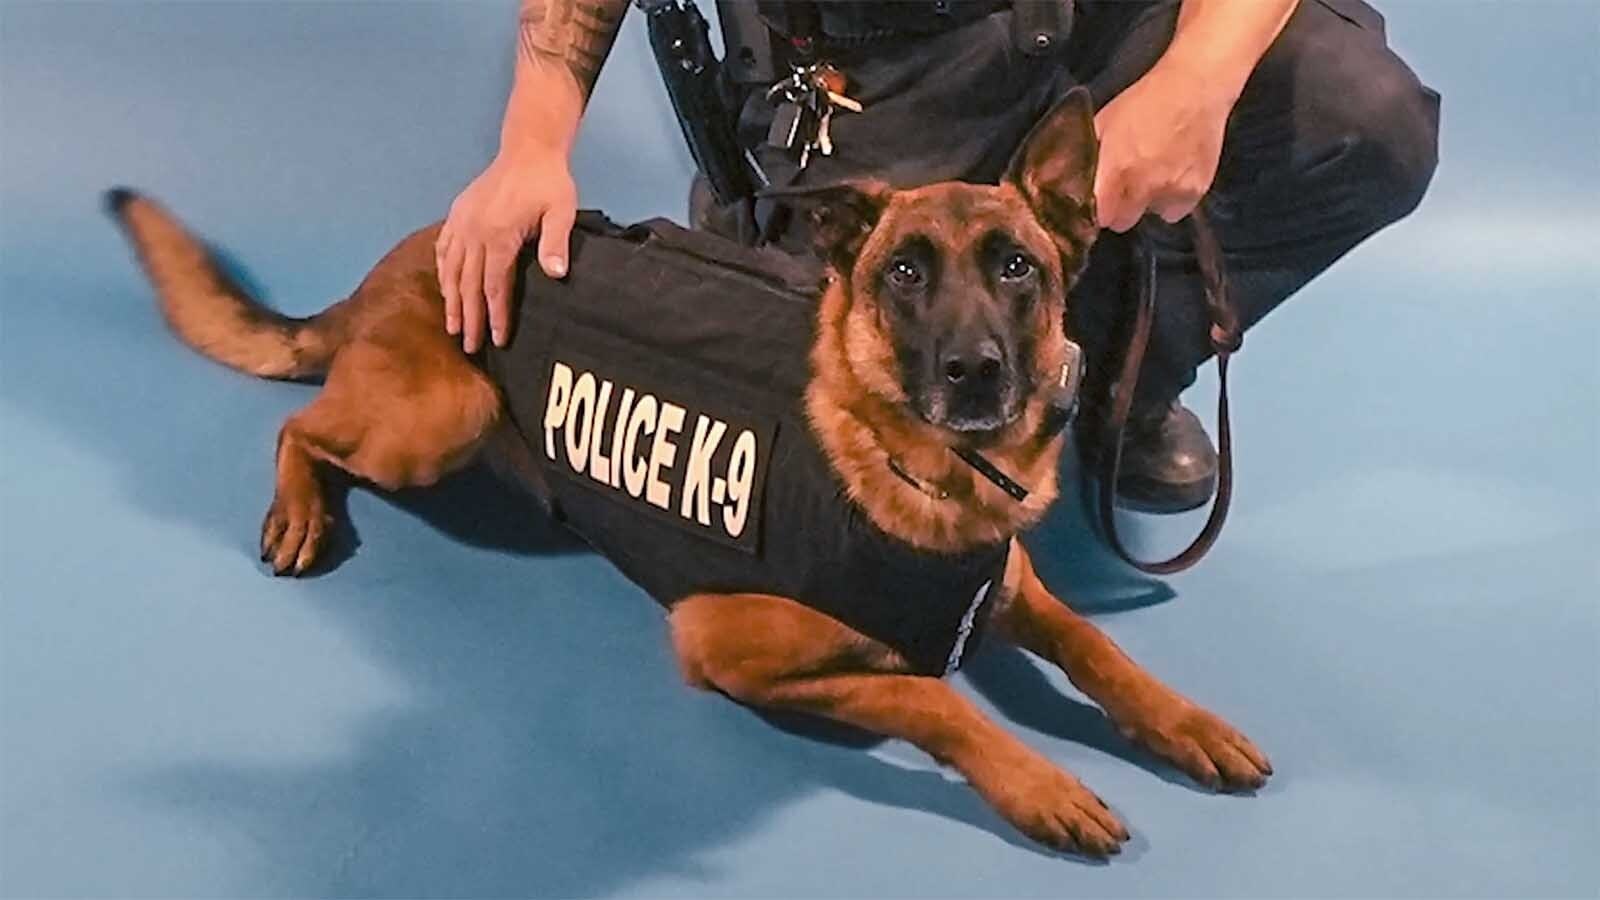 Bilko, an 8-year-old Belgian Malinois was a rock star K-9 officer for the Gillette Police Department before his recent retirement.